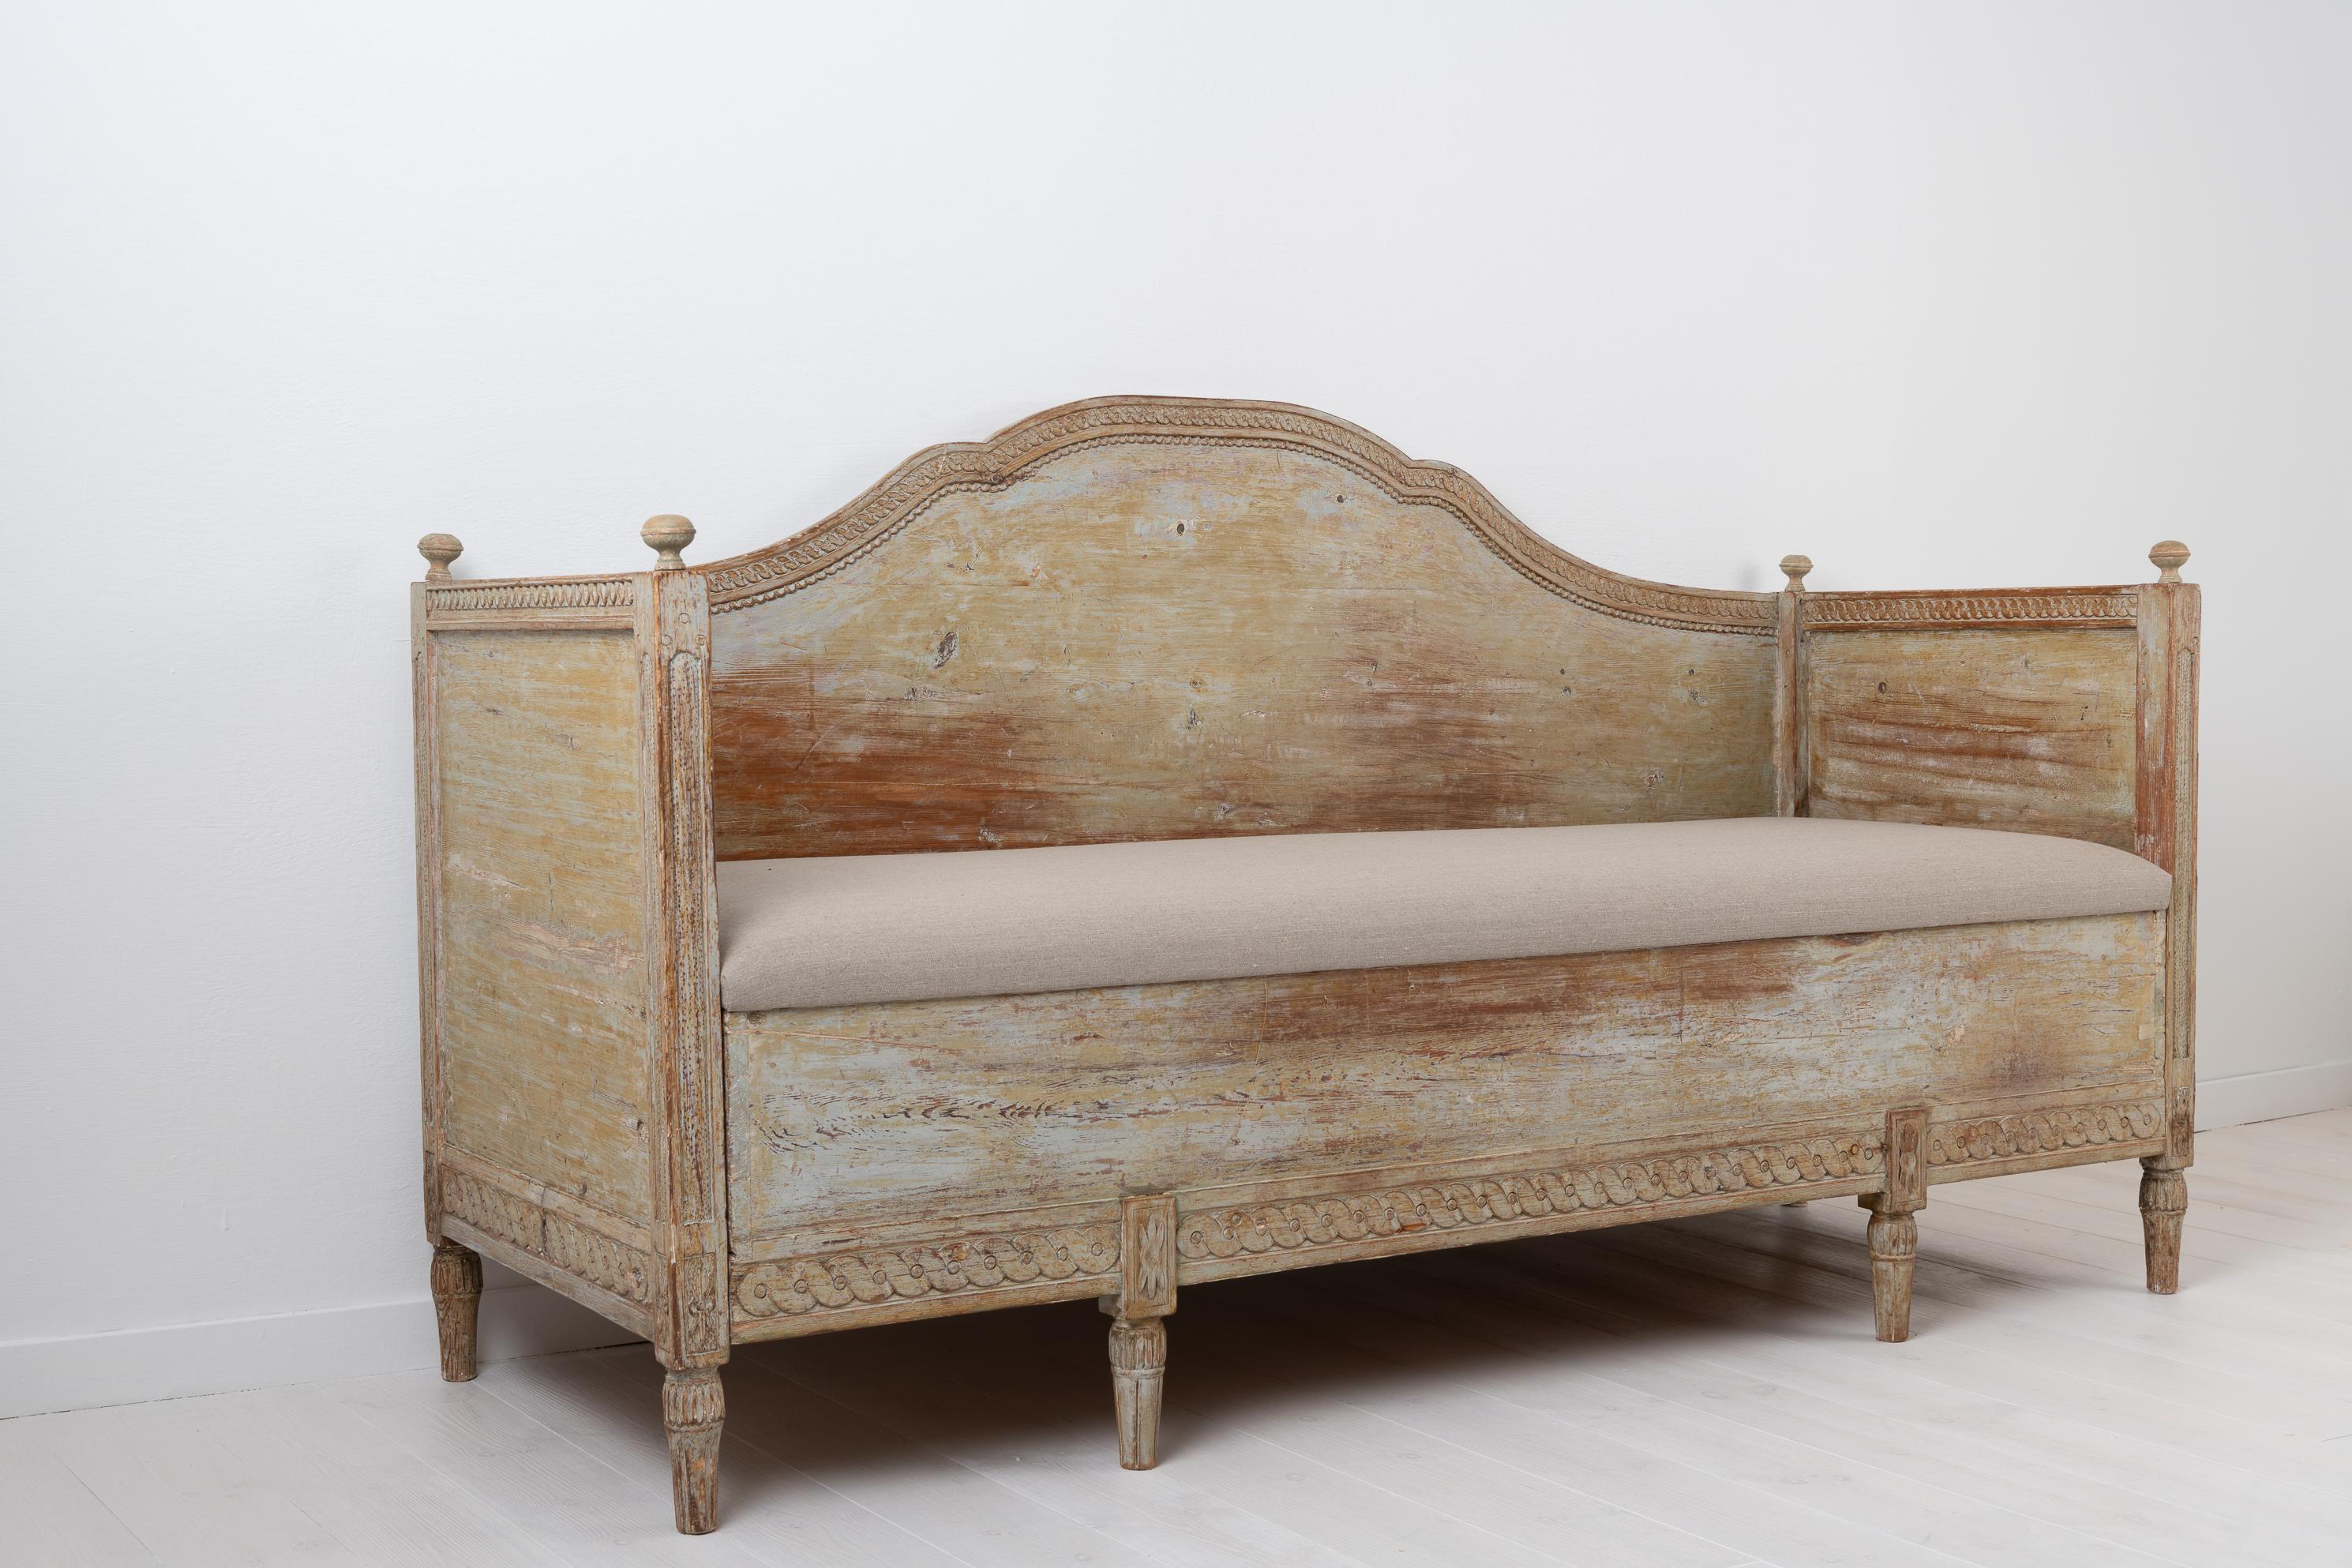 Hand-Crafted Antique Neoclassical Sofa from Northern Sweden